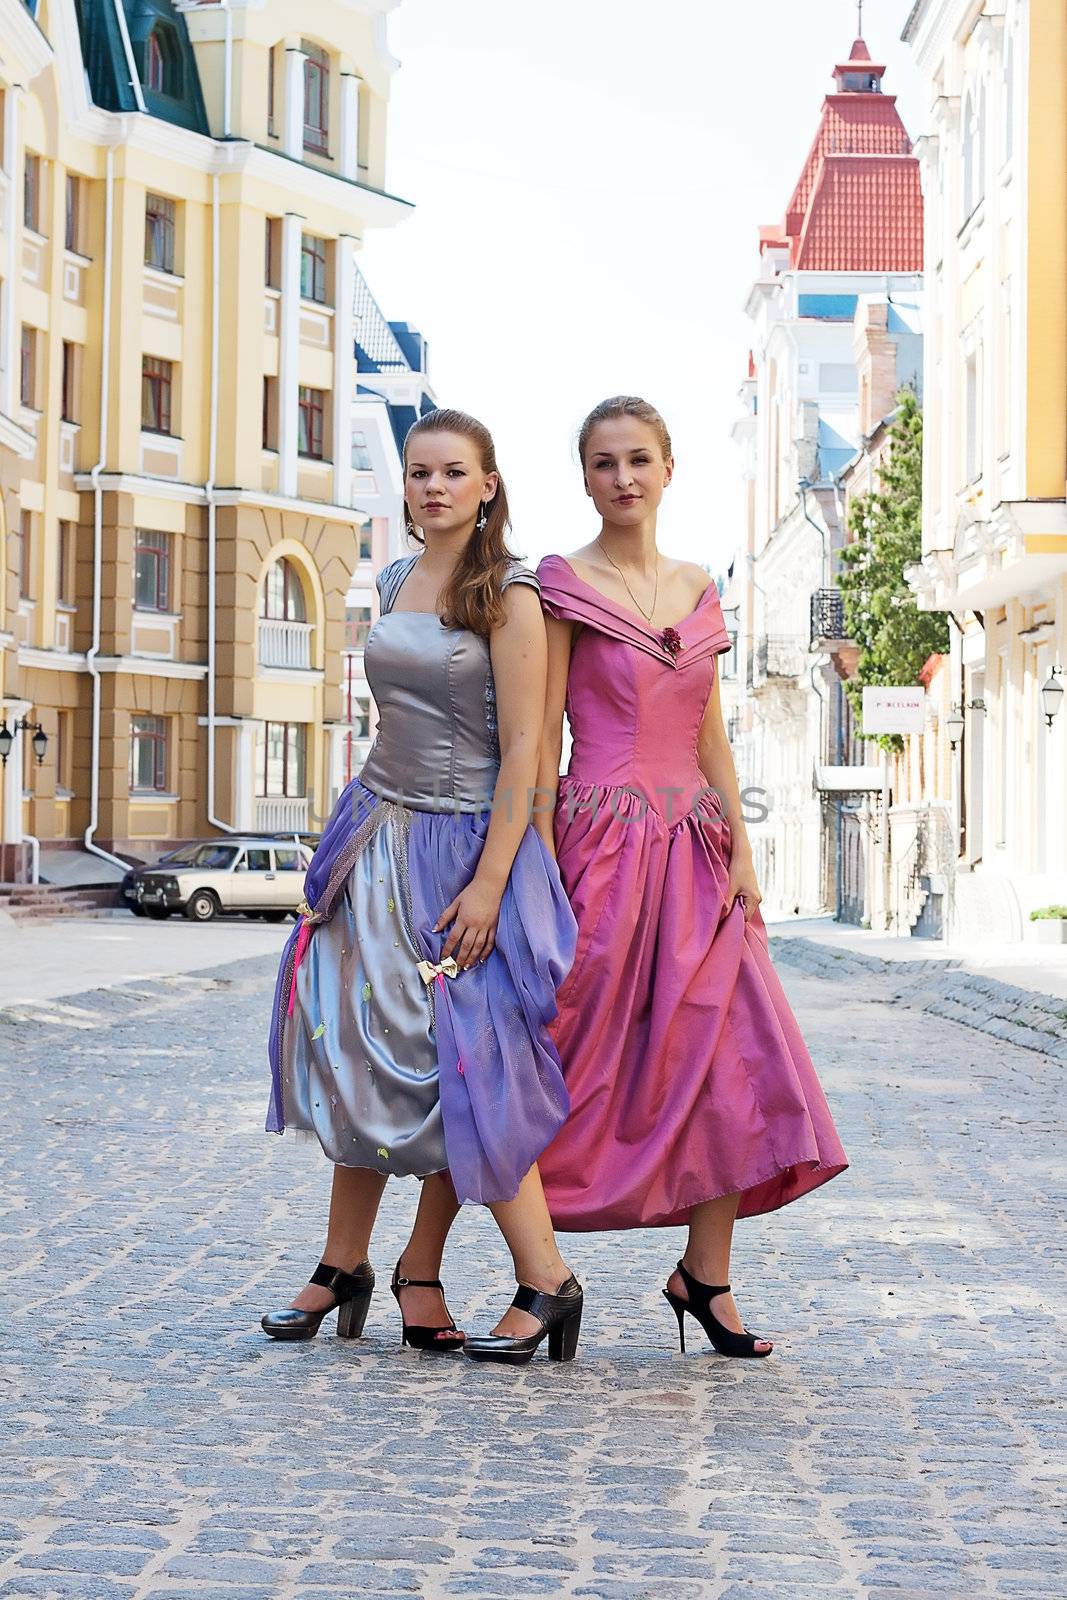 Two girls in dresses in the city by victosha